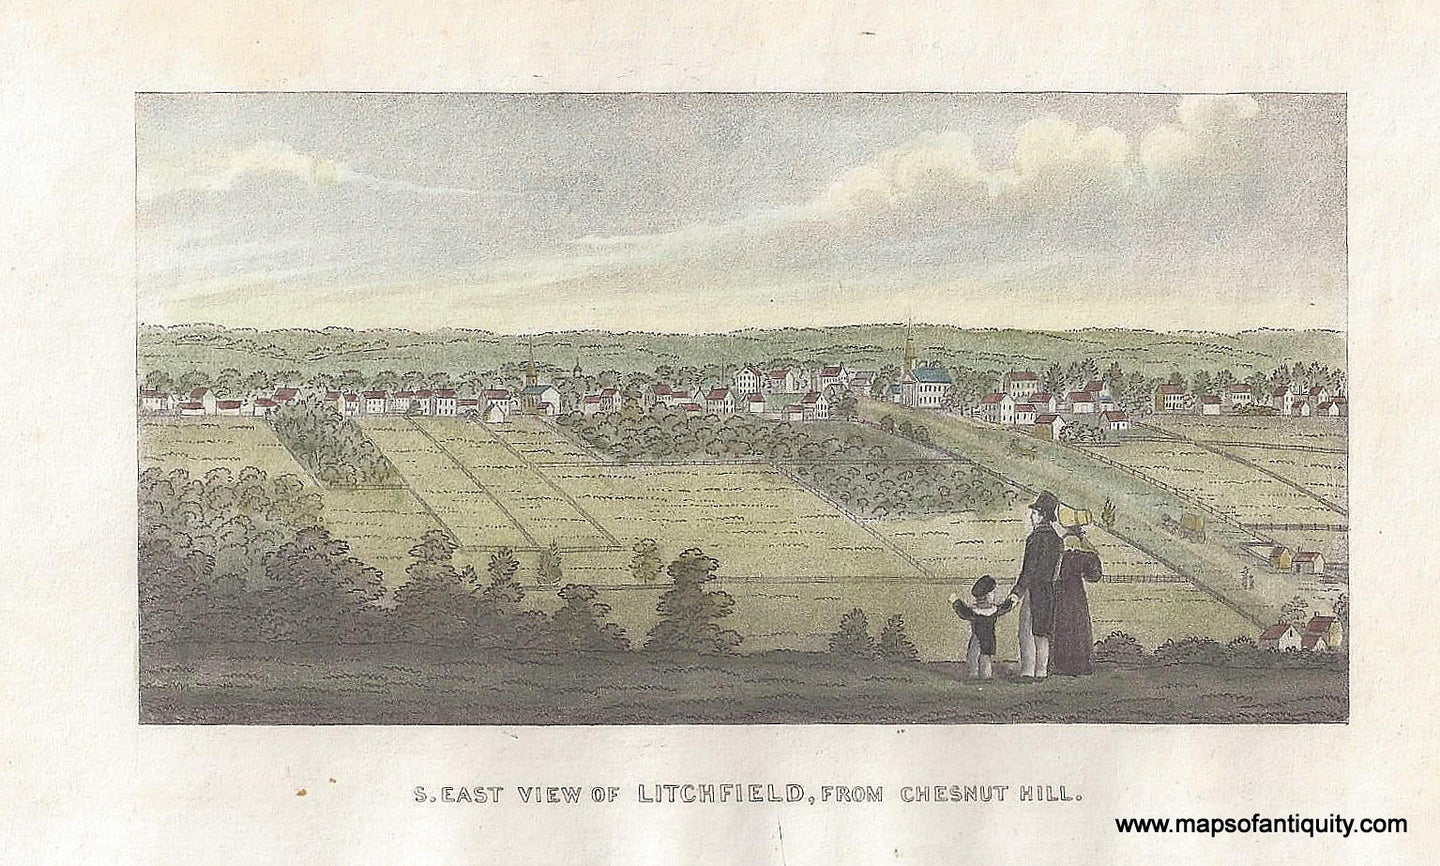 Hand-Colored-Genuine-Antique-Illustration-S-East-View-of-Litchfield-from-Chesnut-Hill-c-1840-Barber-Maps-Of-Antiquity